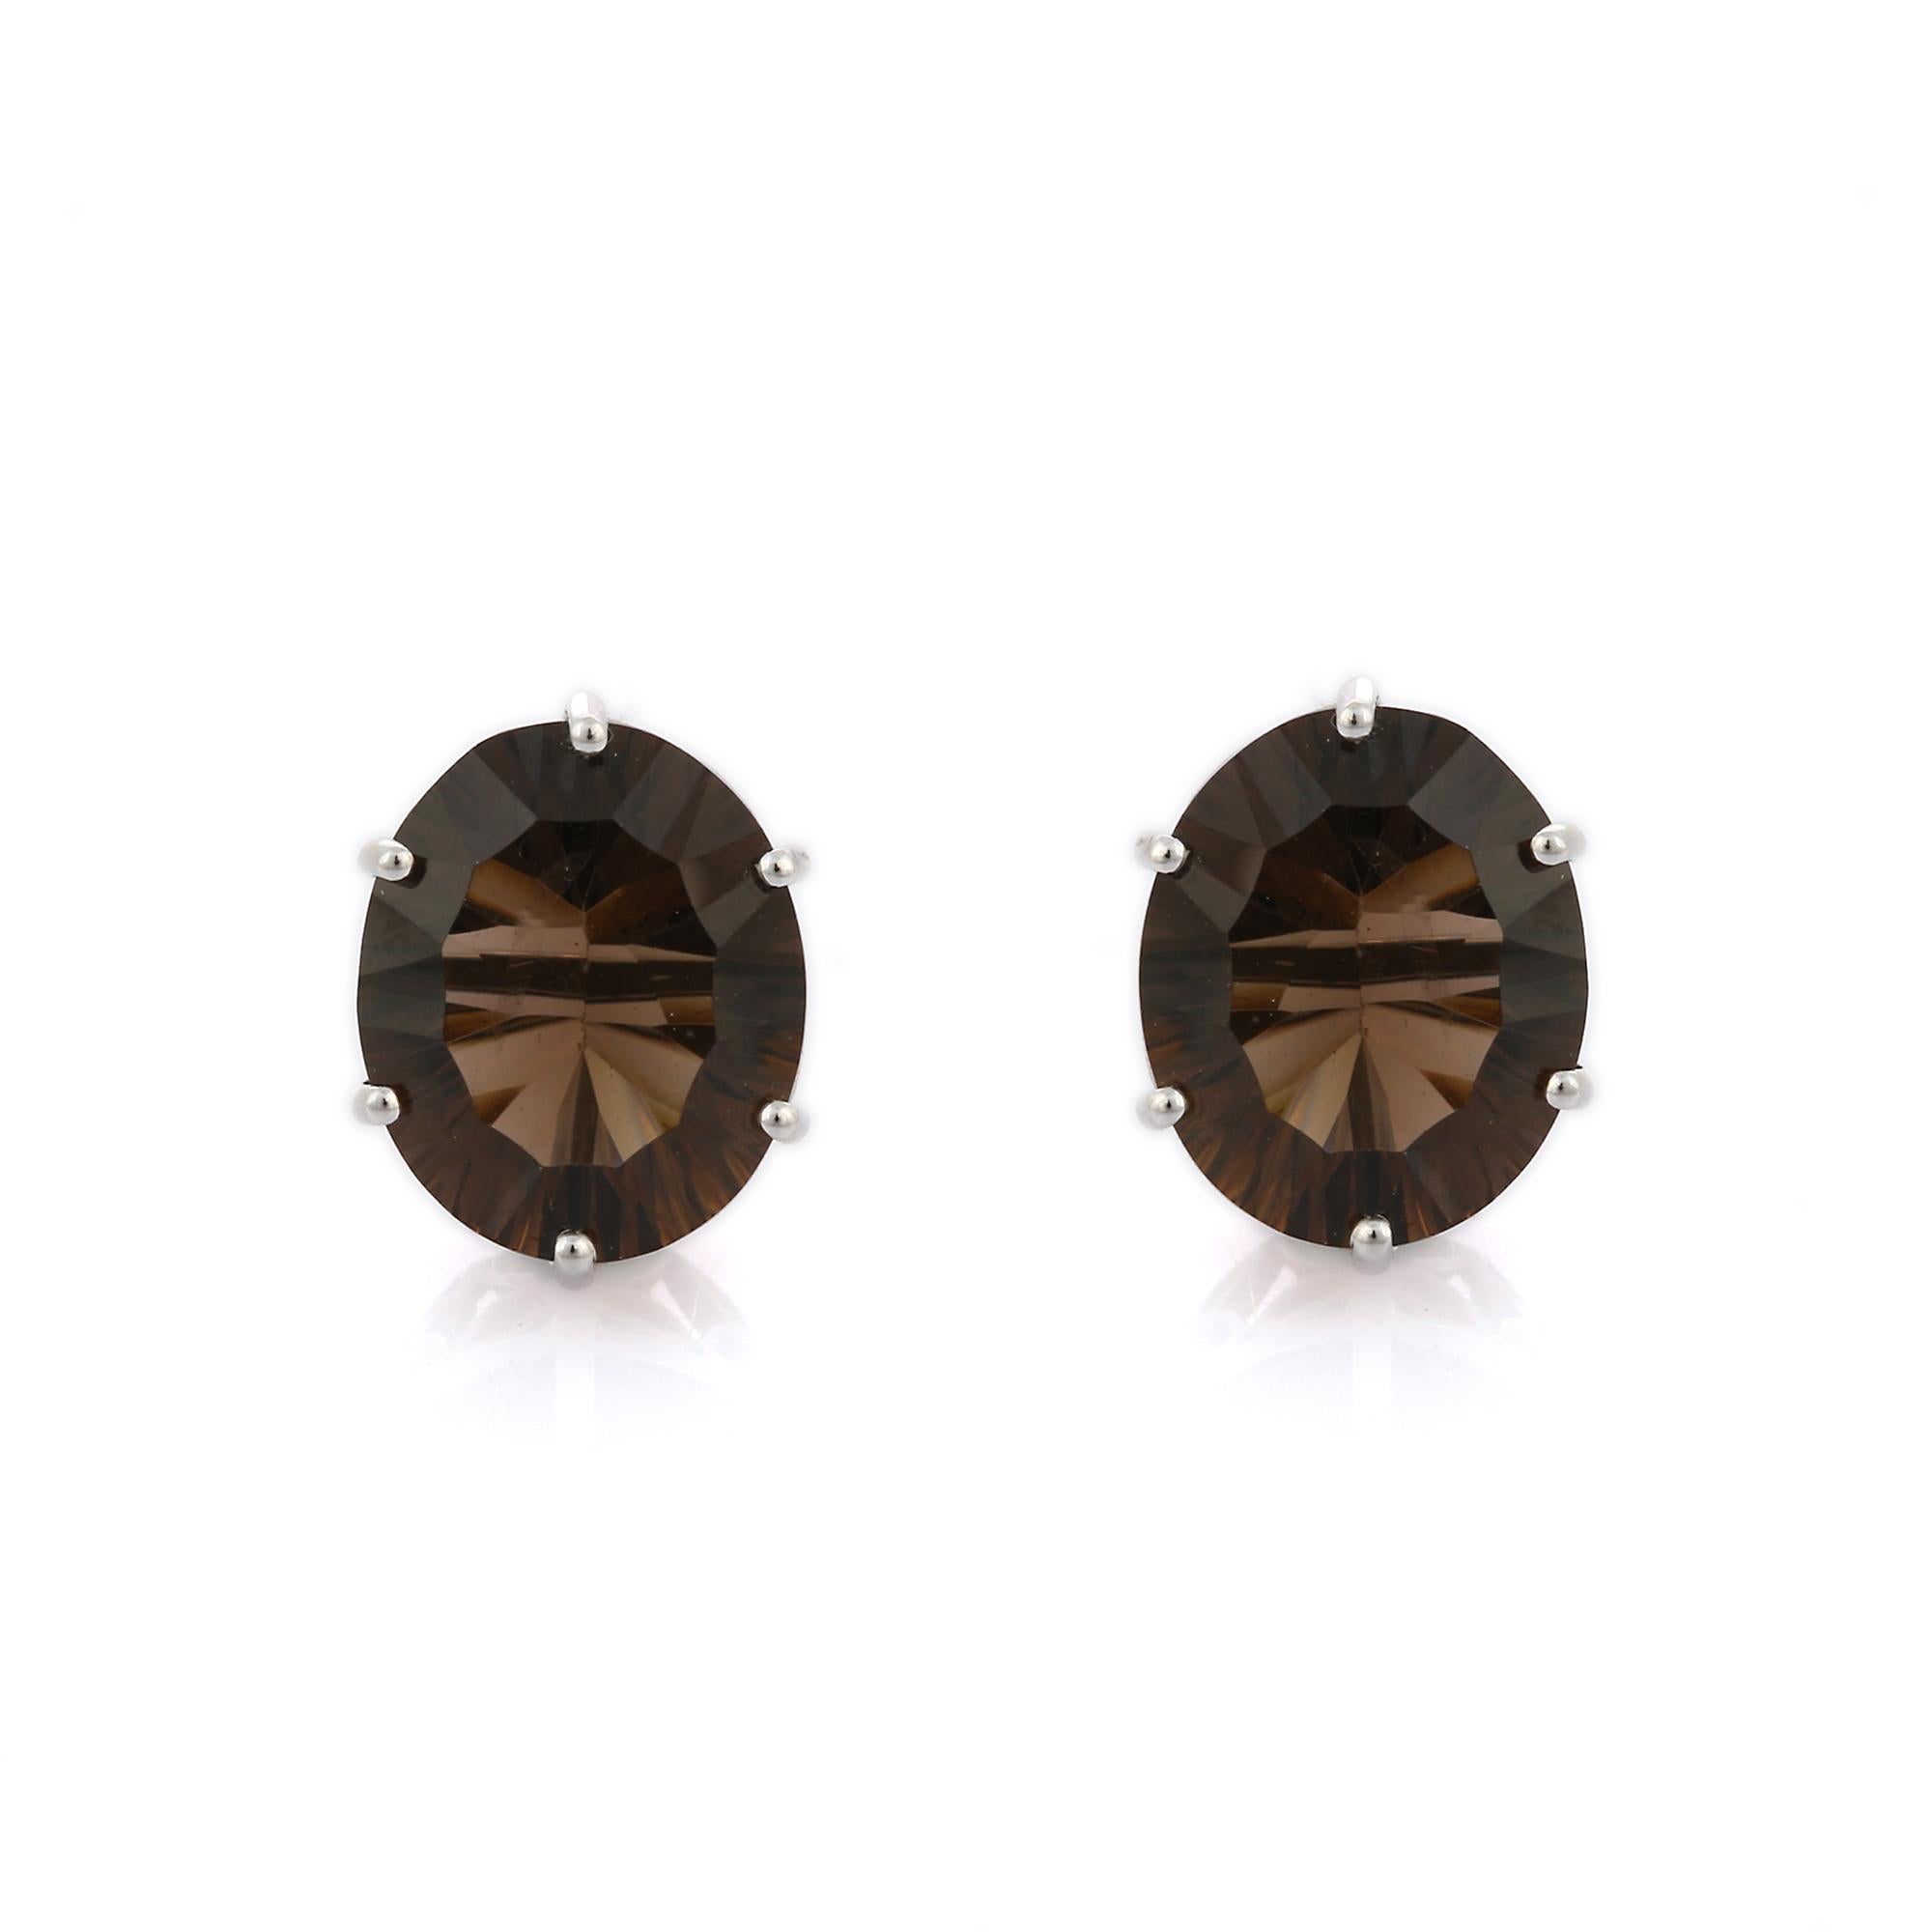 Art Deco 14k Solid White Gold Stud Earrings with 7.21 ct Dark Brown Smoky Quartz Gemstone For Sale